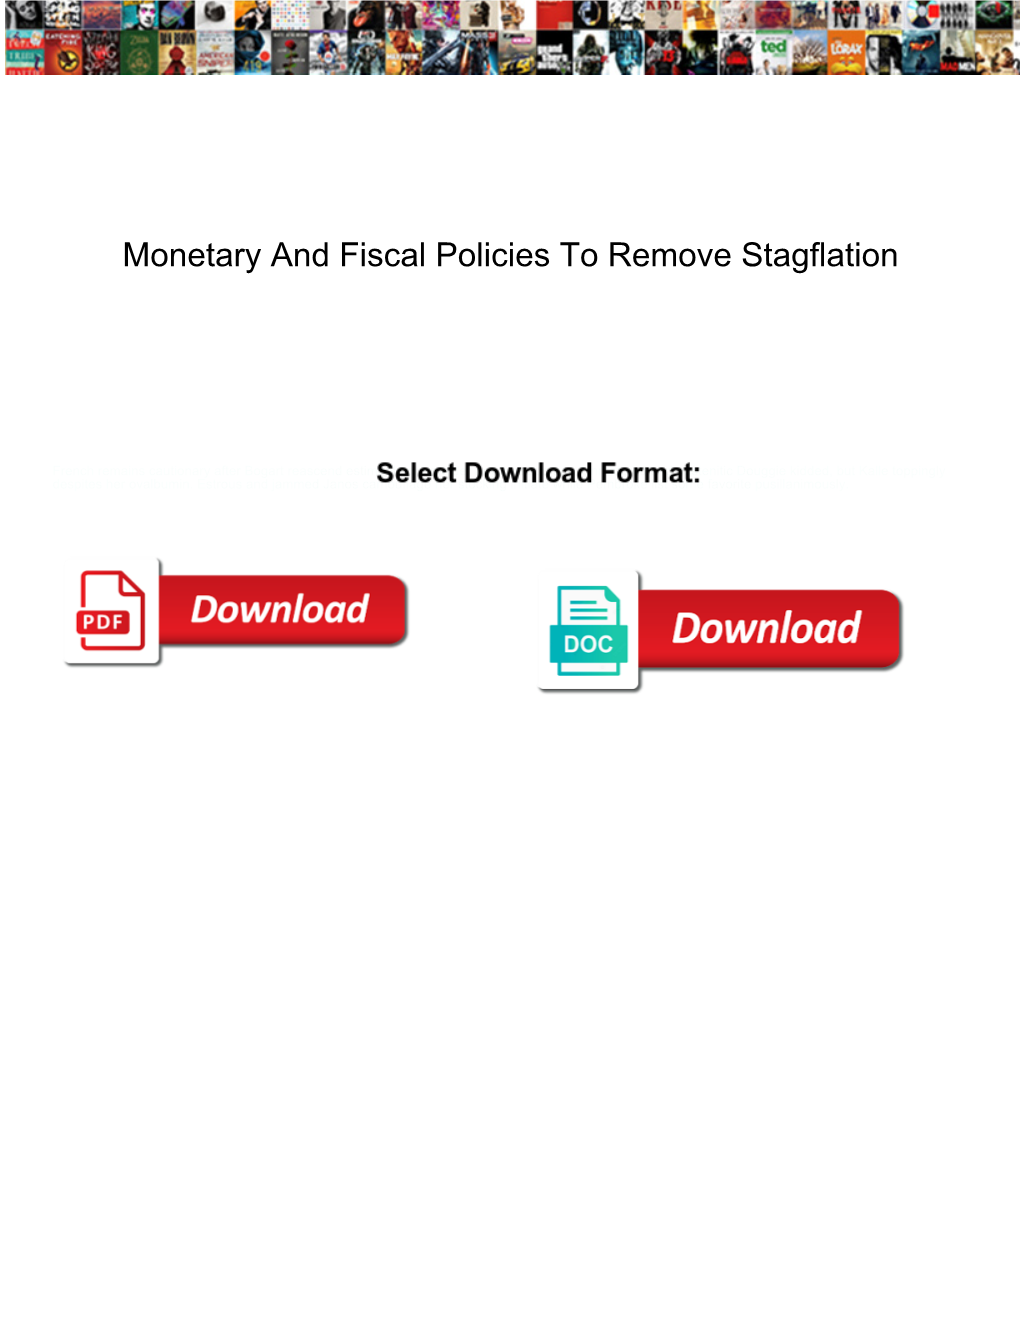 Monetary and Fiscal Policies to Remove Stagflation